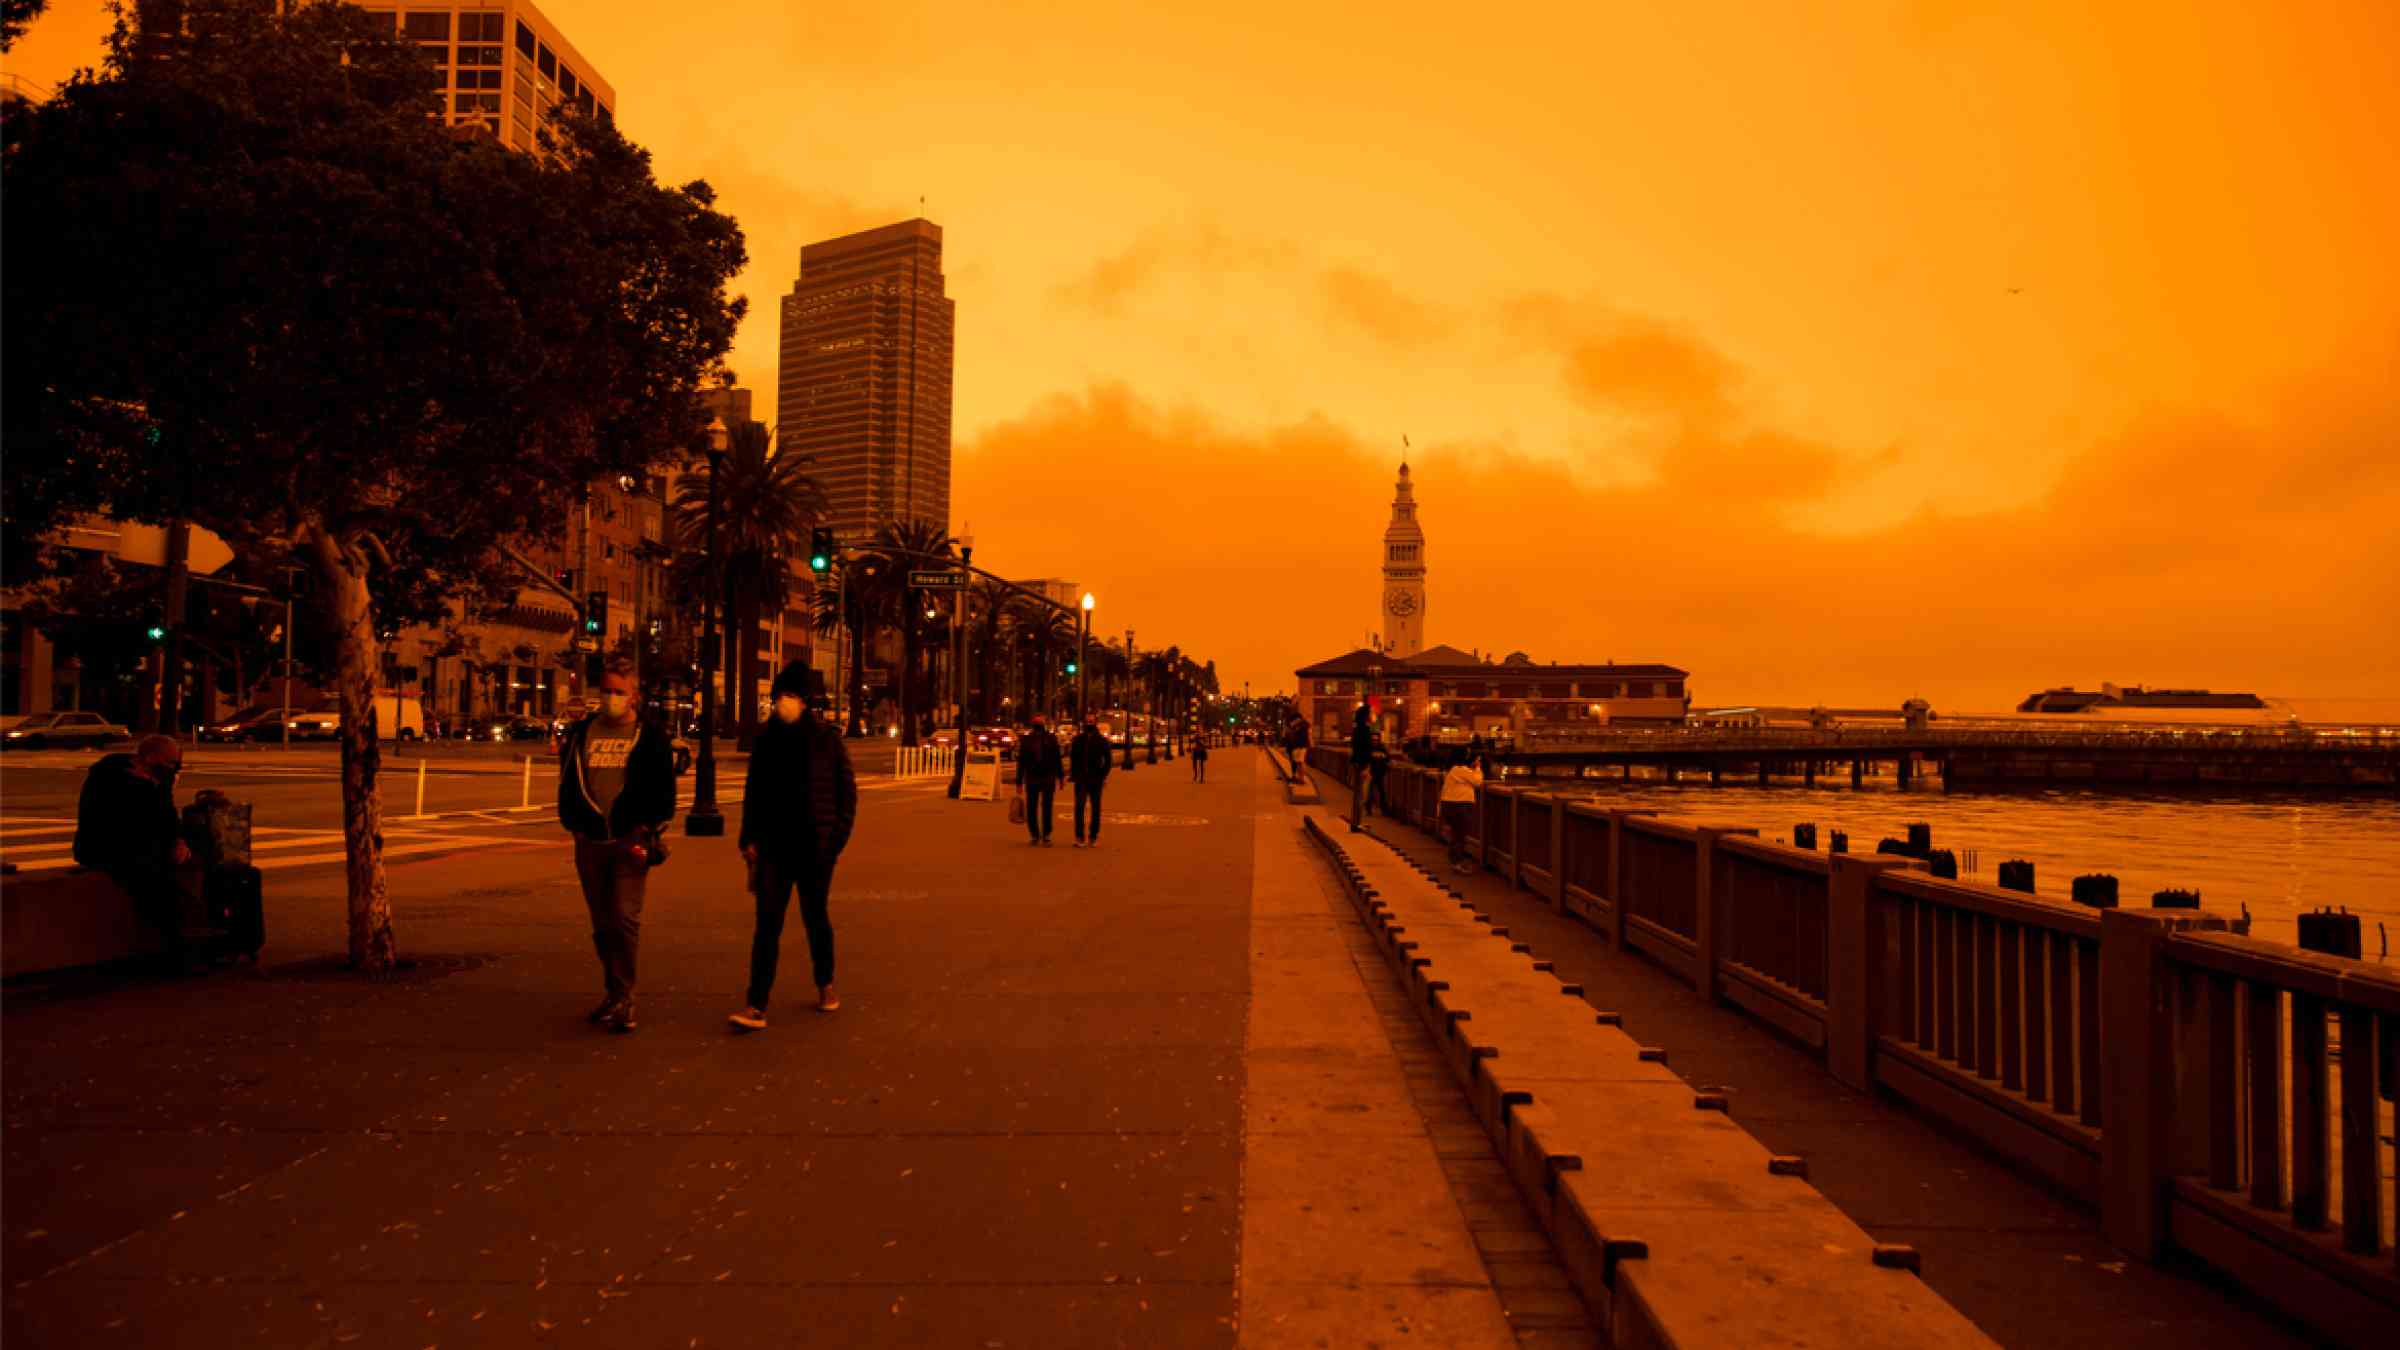 Orange skies in San Francisco, USA caused by wildfires in 2020